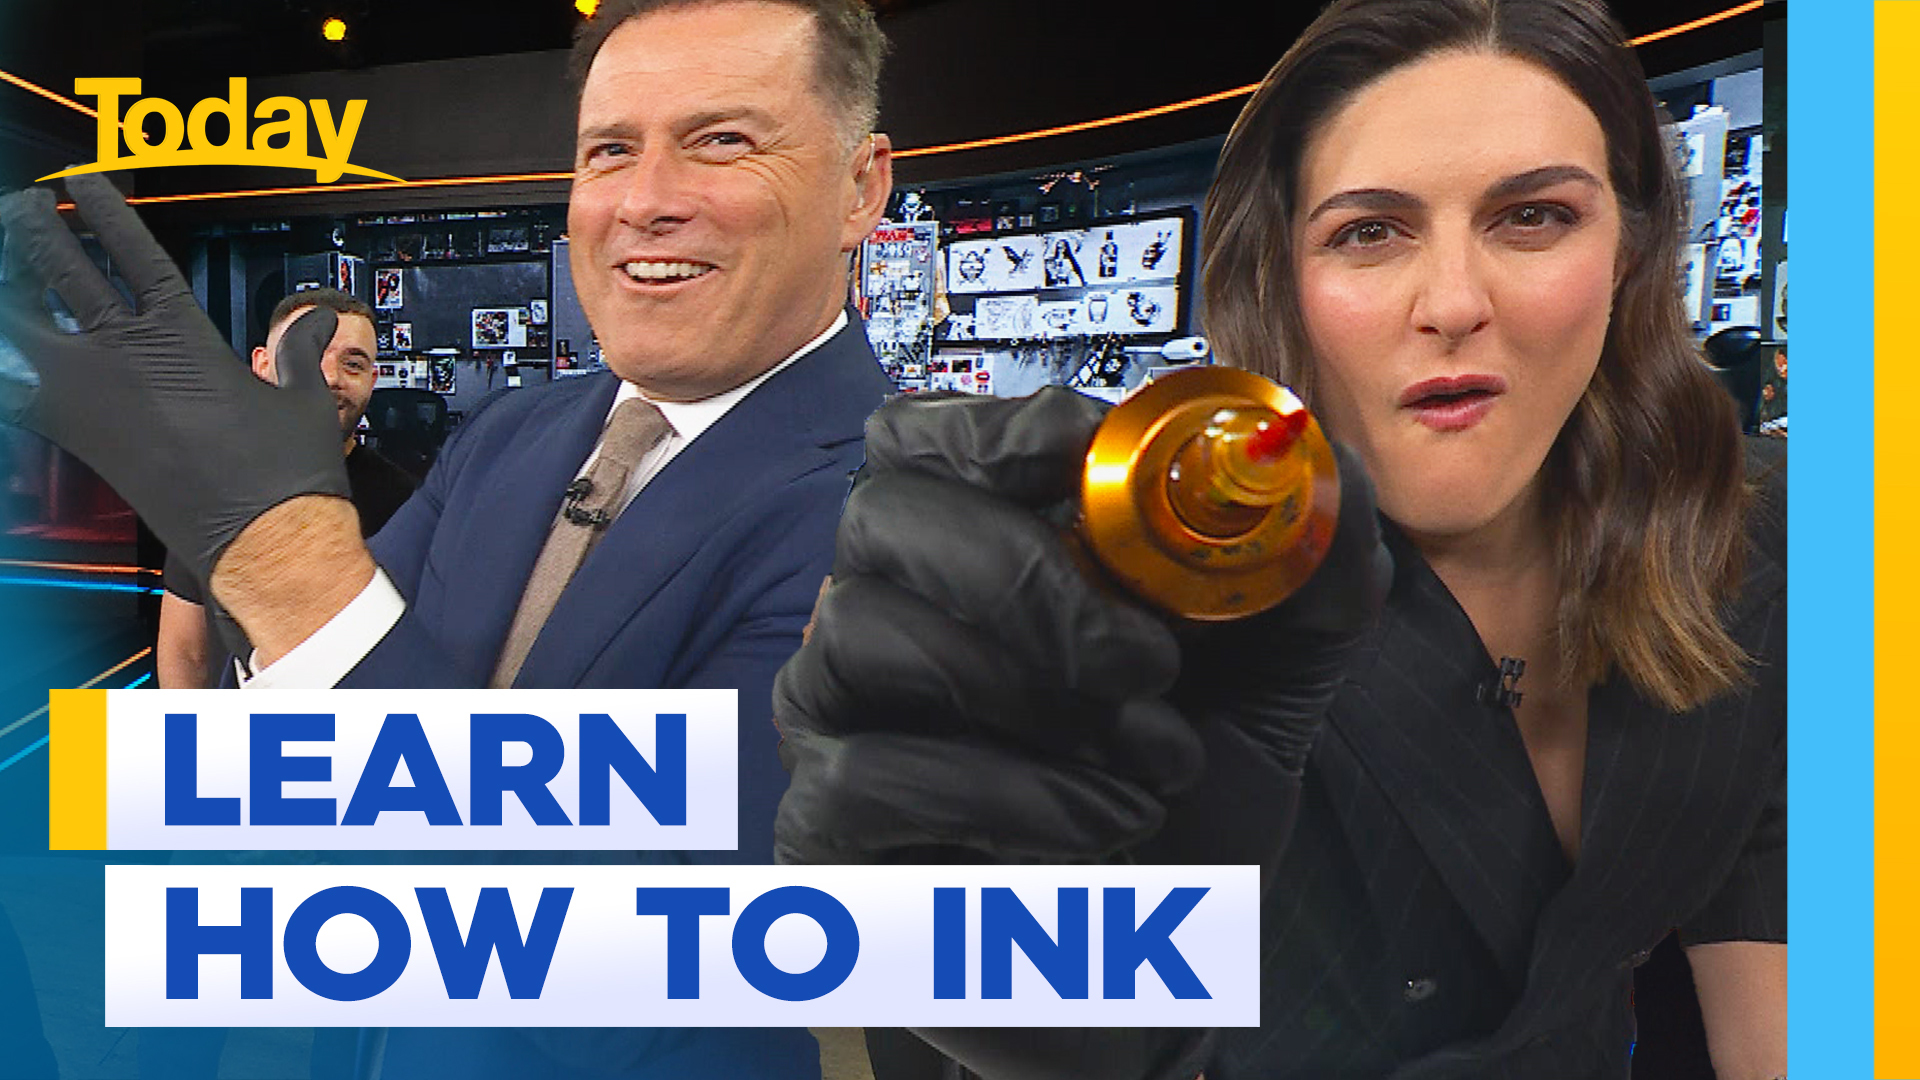 New social trend teaching people how to tattoo